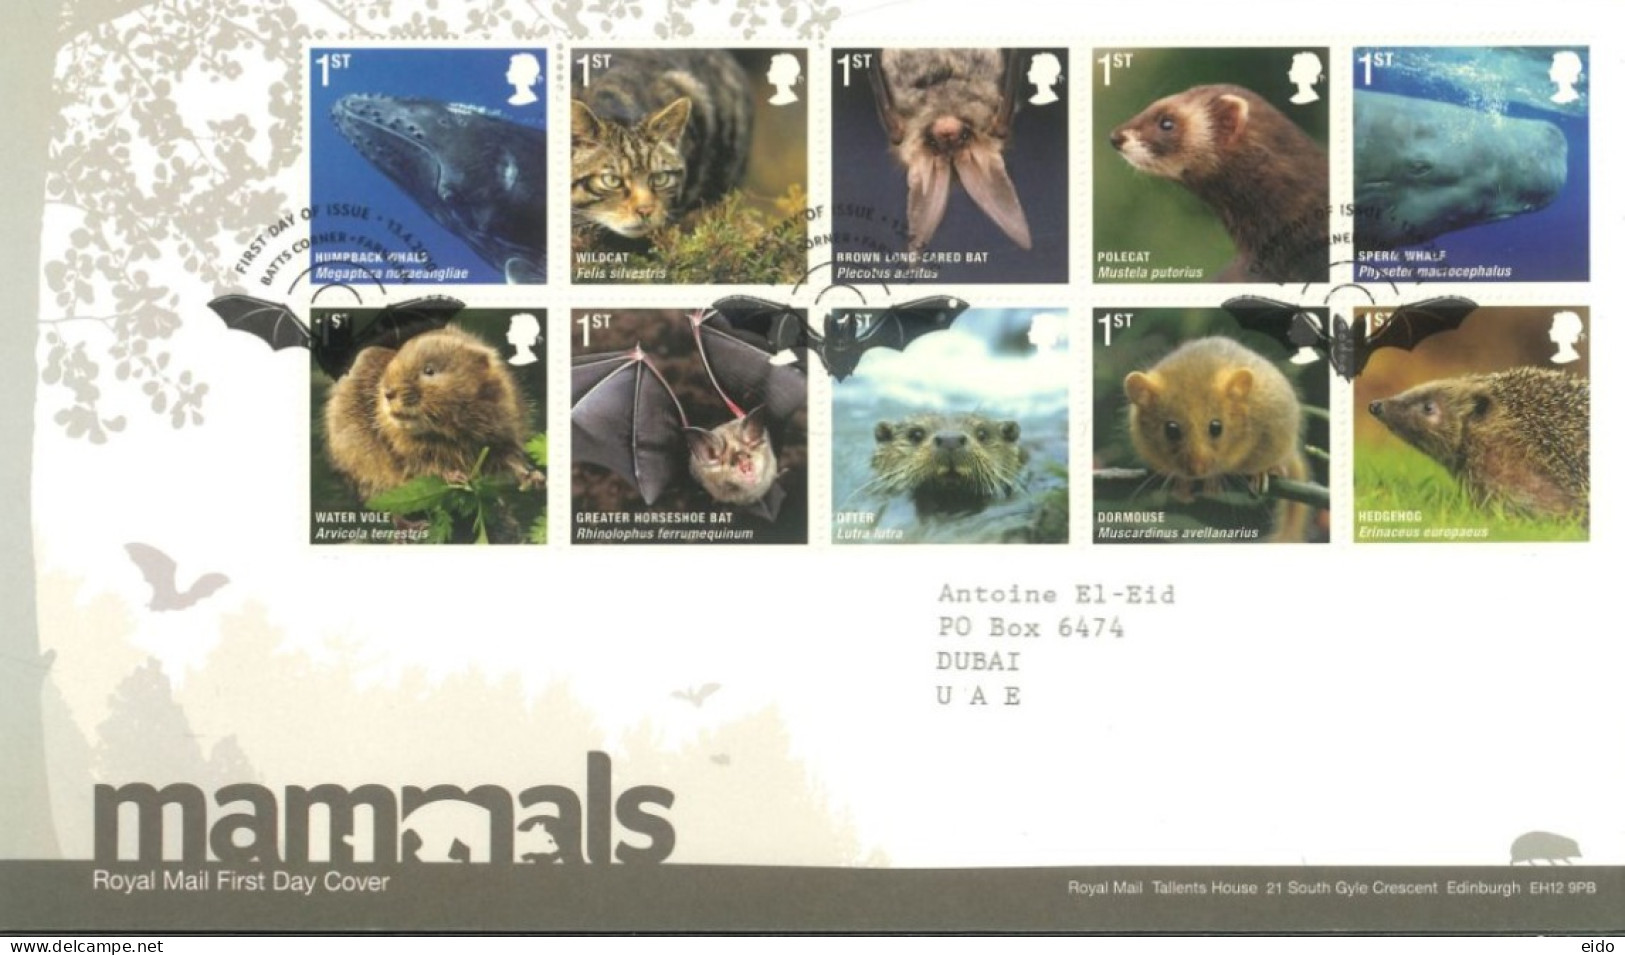 GREAT BRITAIN - 2010, FDC STAMPS OF MAMMALS. - Covers & Documents